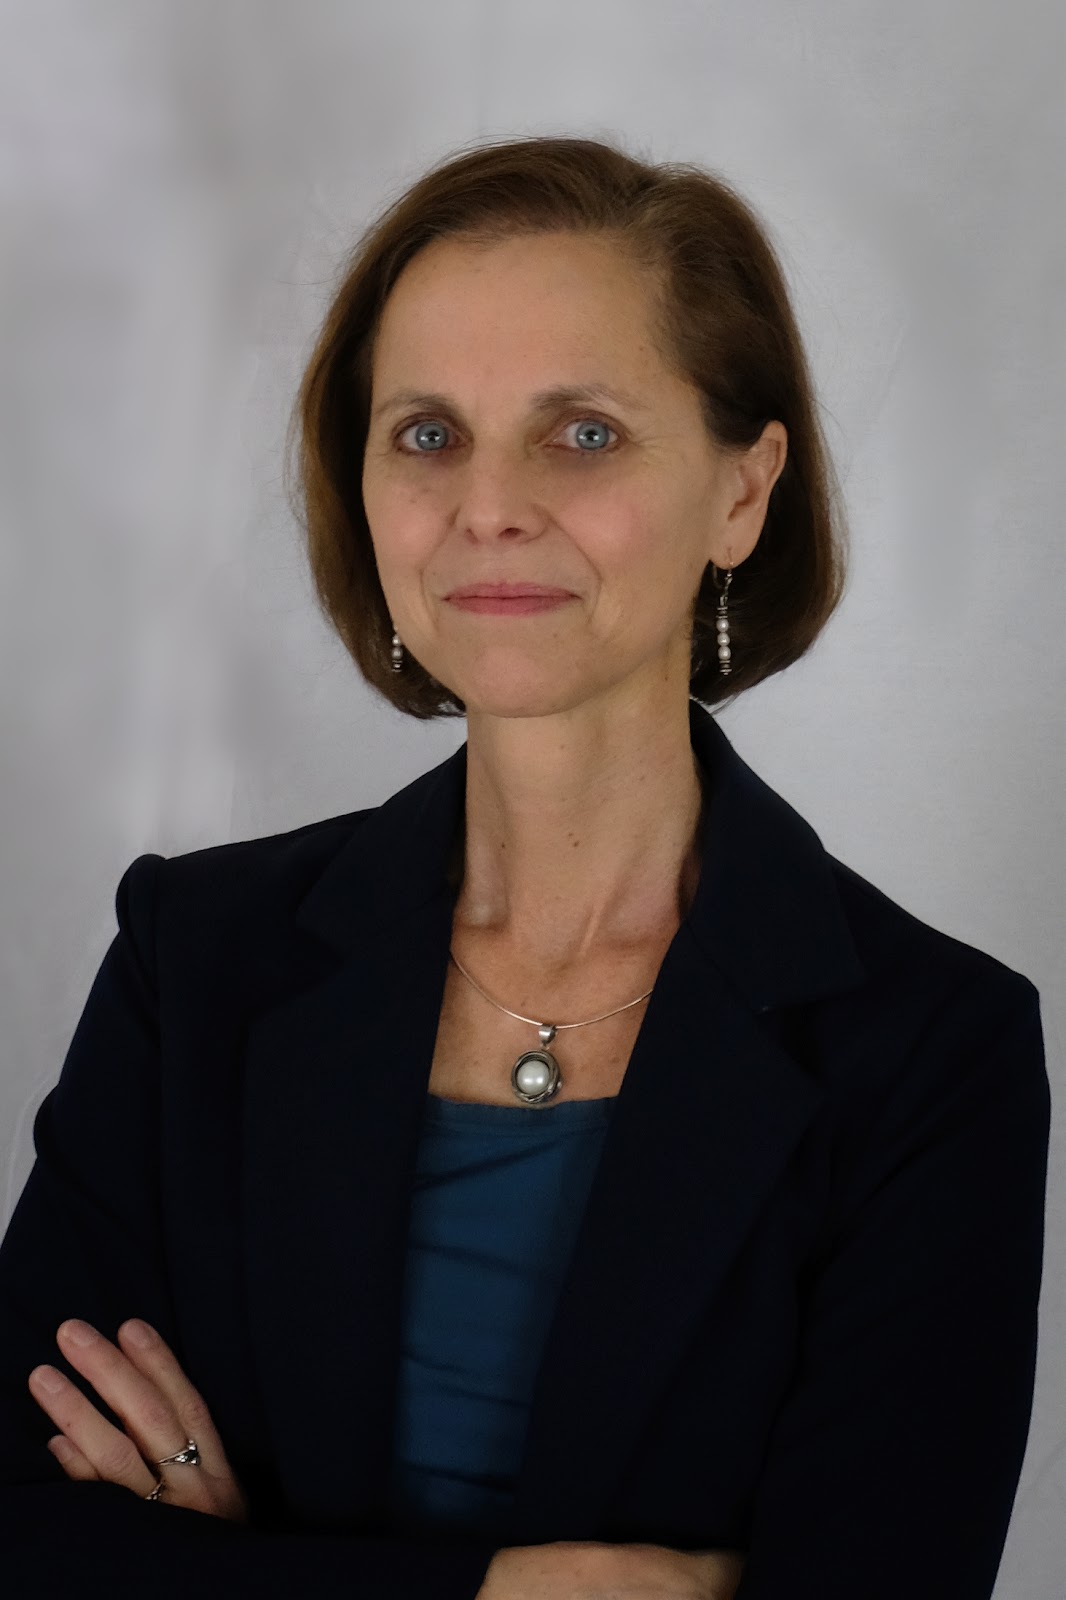 Dr. Daniela Brancaforte is pictured with arms crossed wearing a black blazer with a blue dress underneath.
